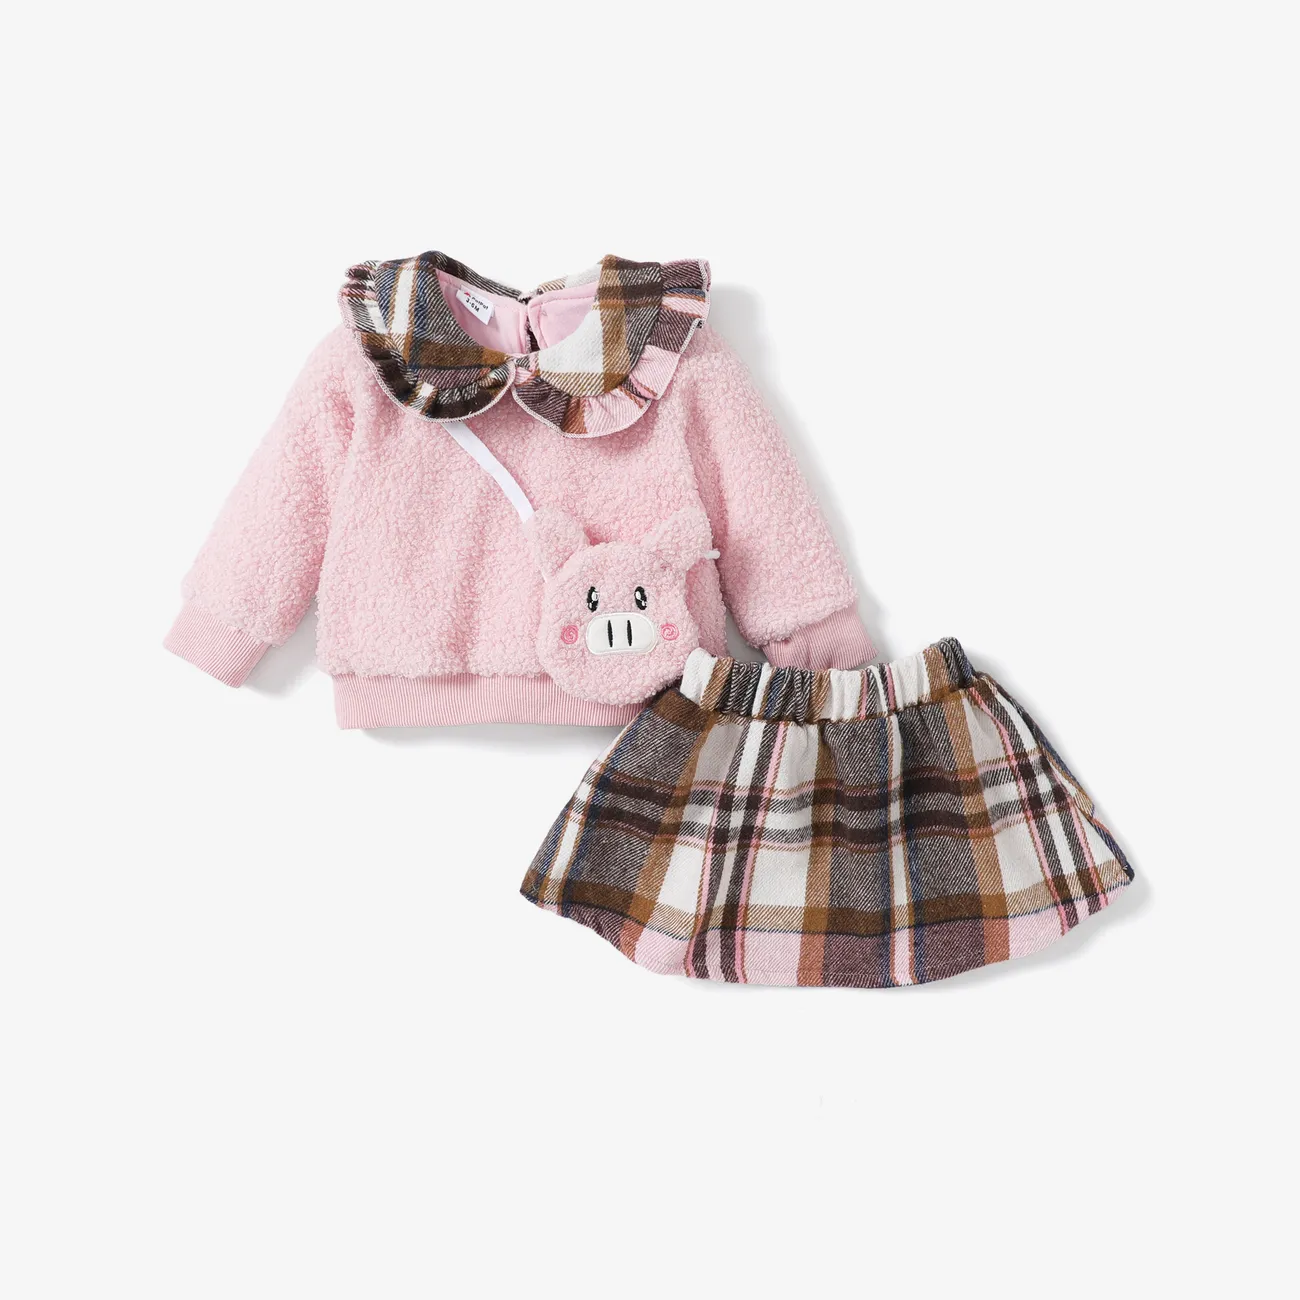 Sweet Baby Girl Dress Set in Medium Thickness Fabric Stitching and Long Sleeves Pink big image 1